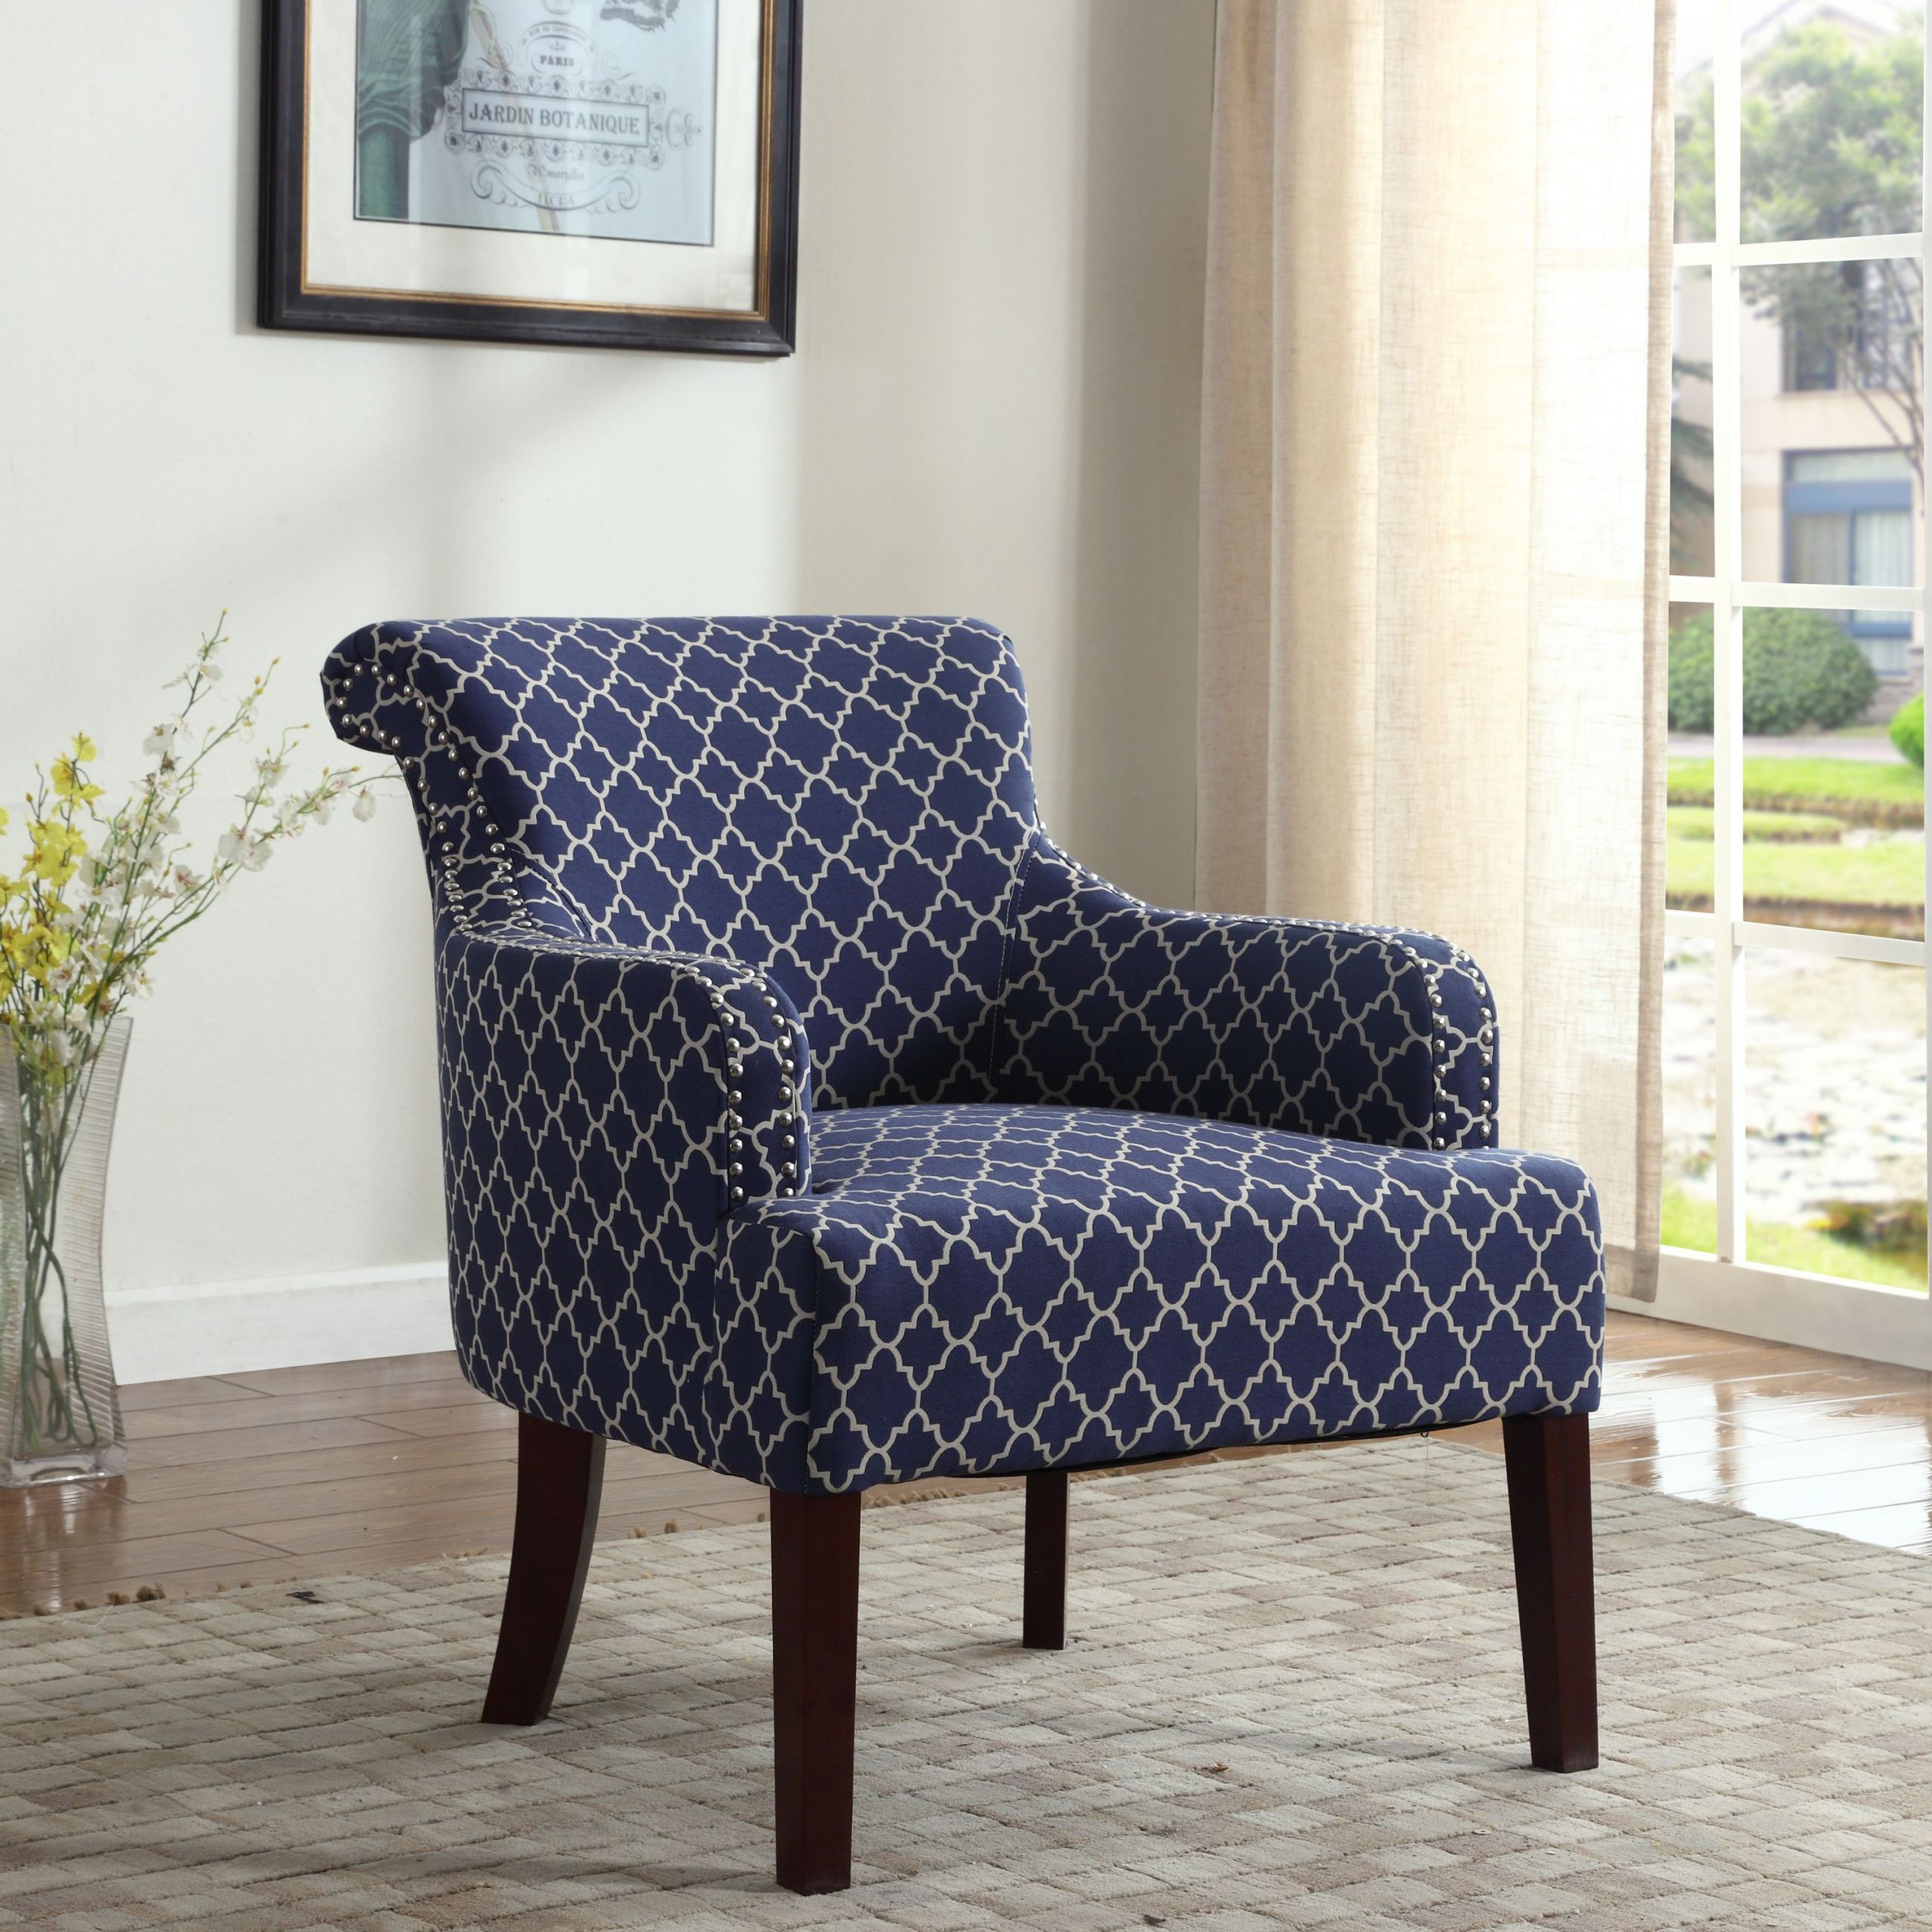 Living Room Chairs Walmart
 Best Master Furniture s Regency Living Room Accent Chair